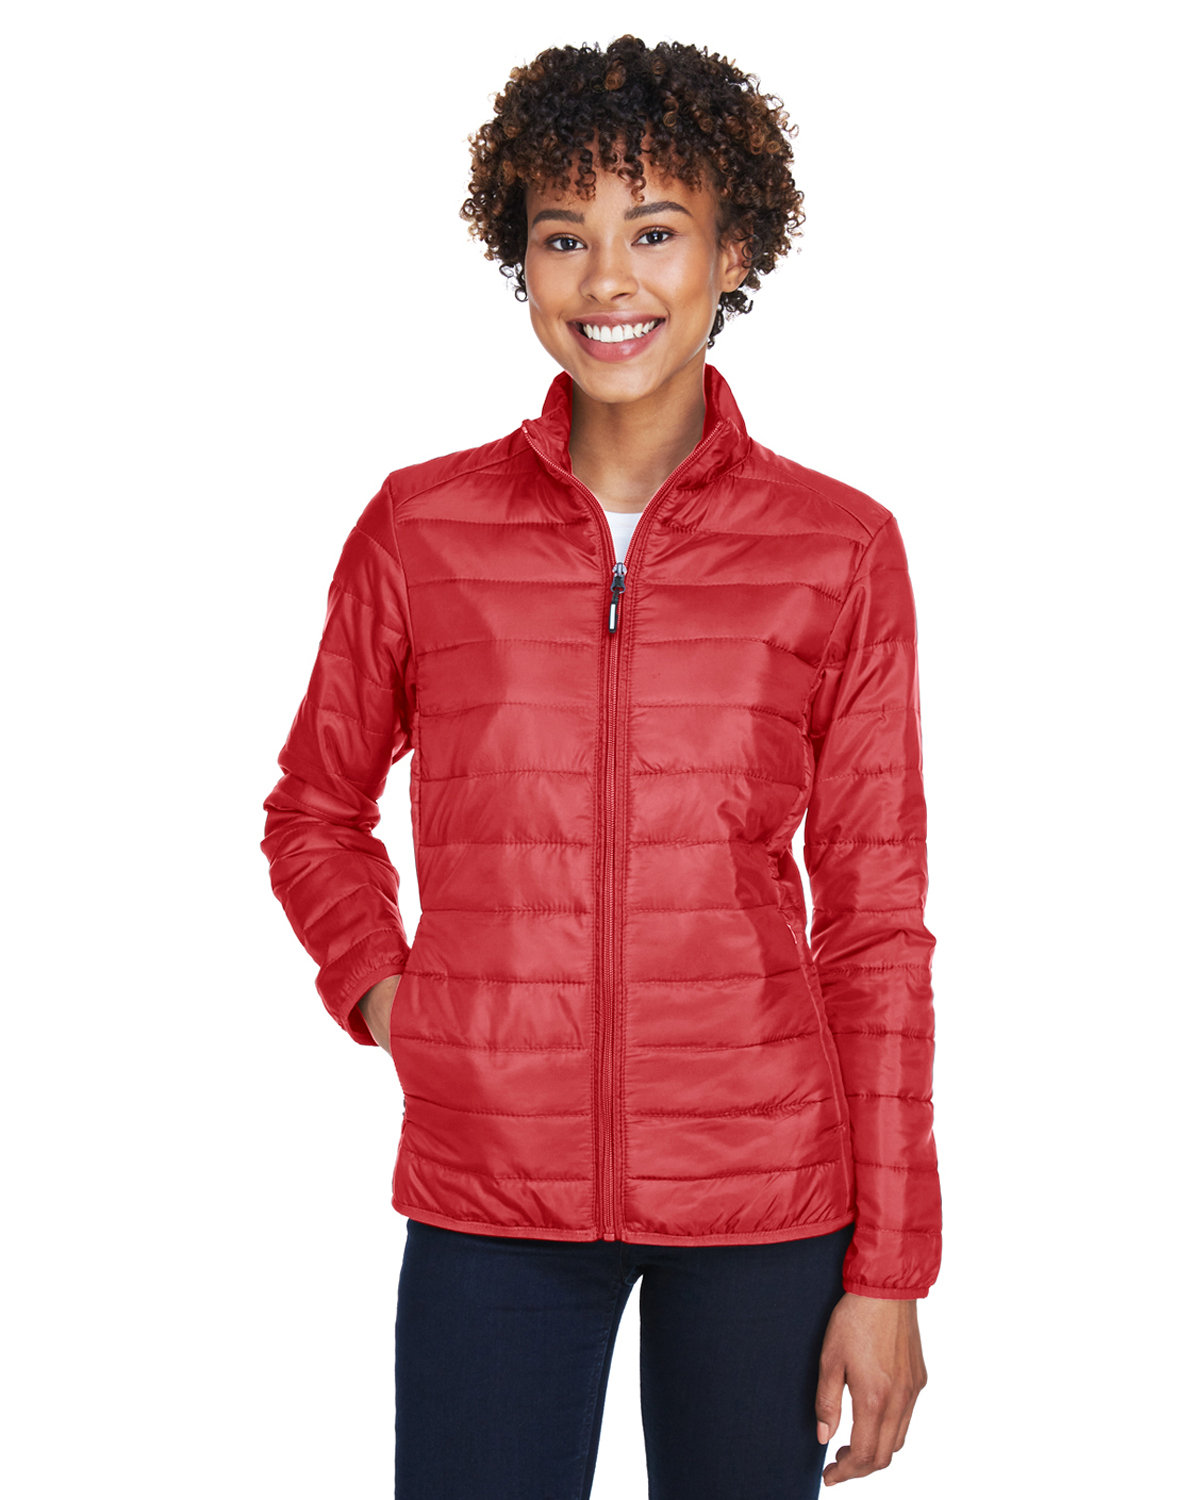 Core 365 Ladies' Prevail Packable Puffer Jacket CLASSIC RED 